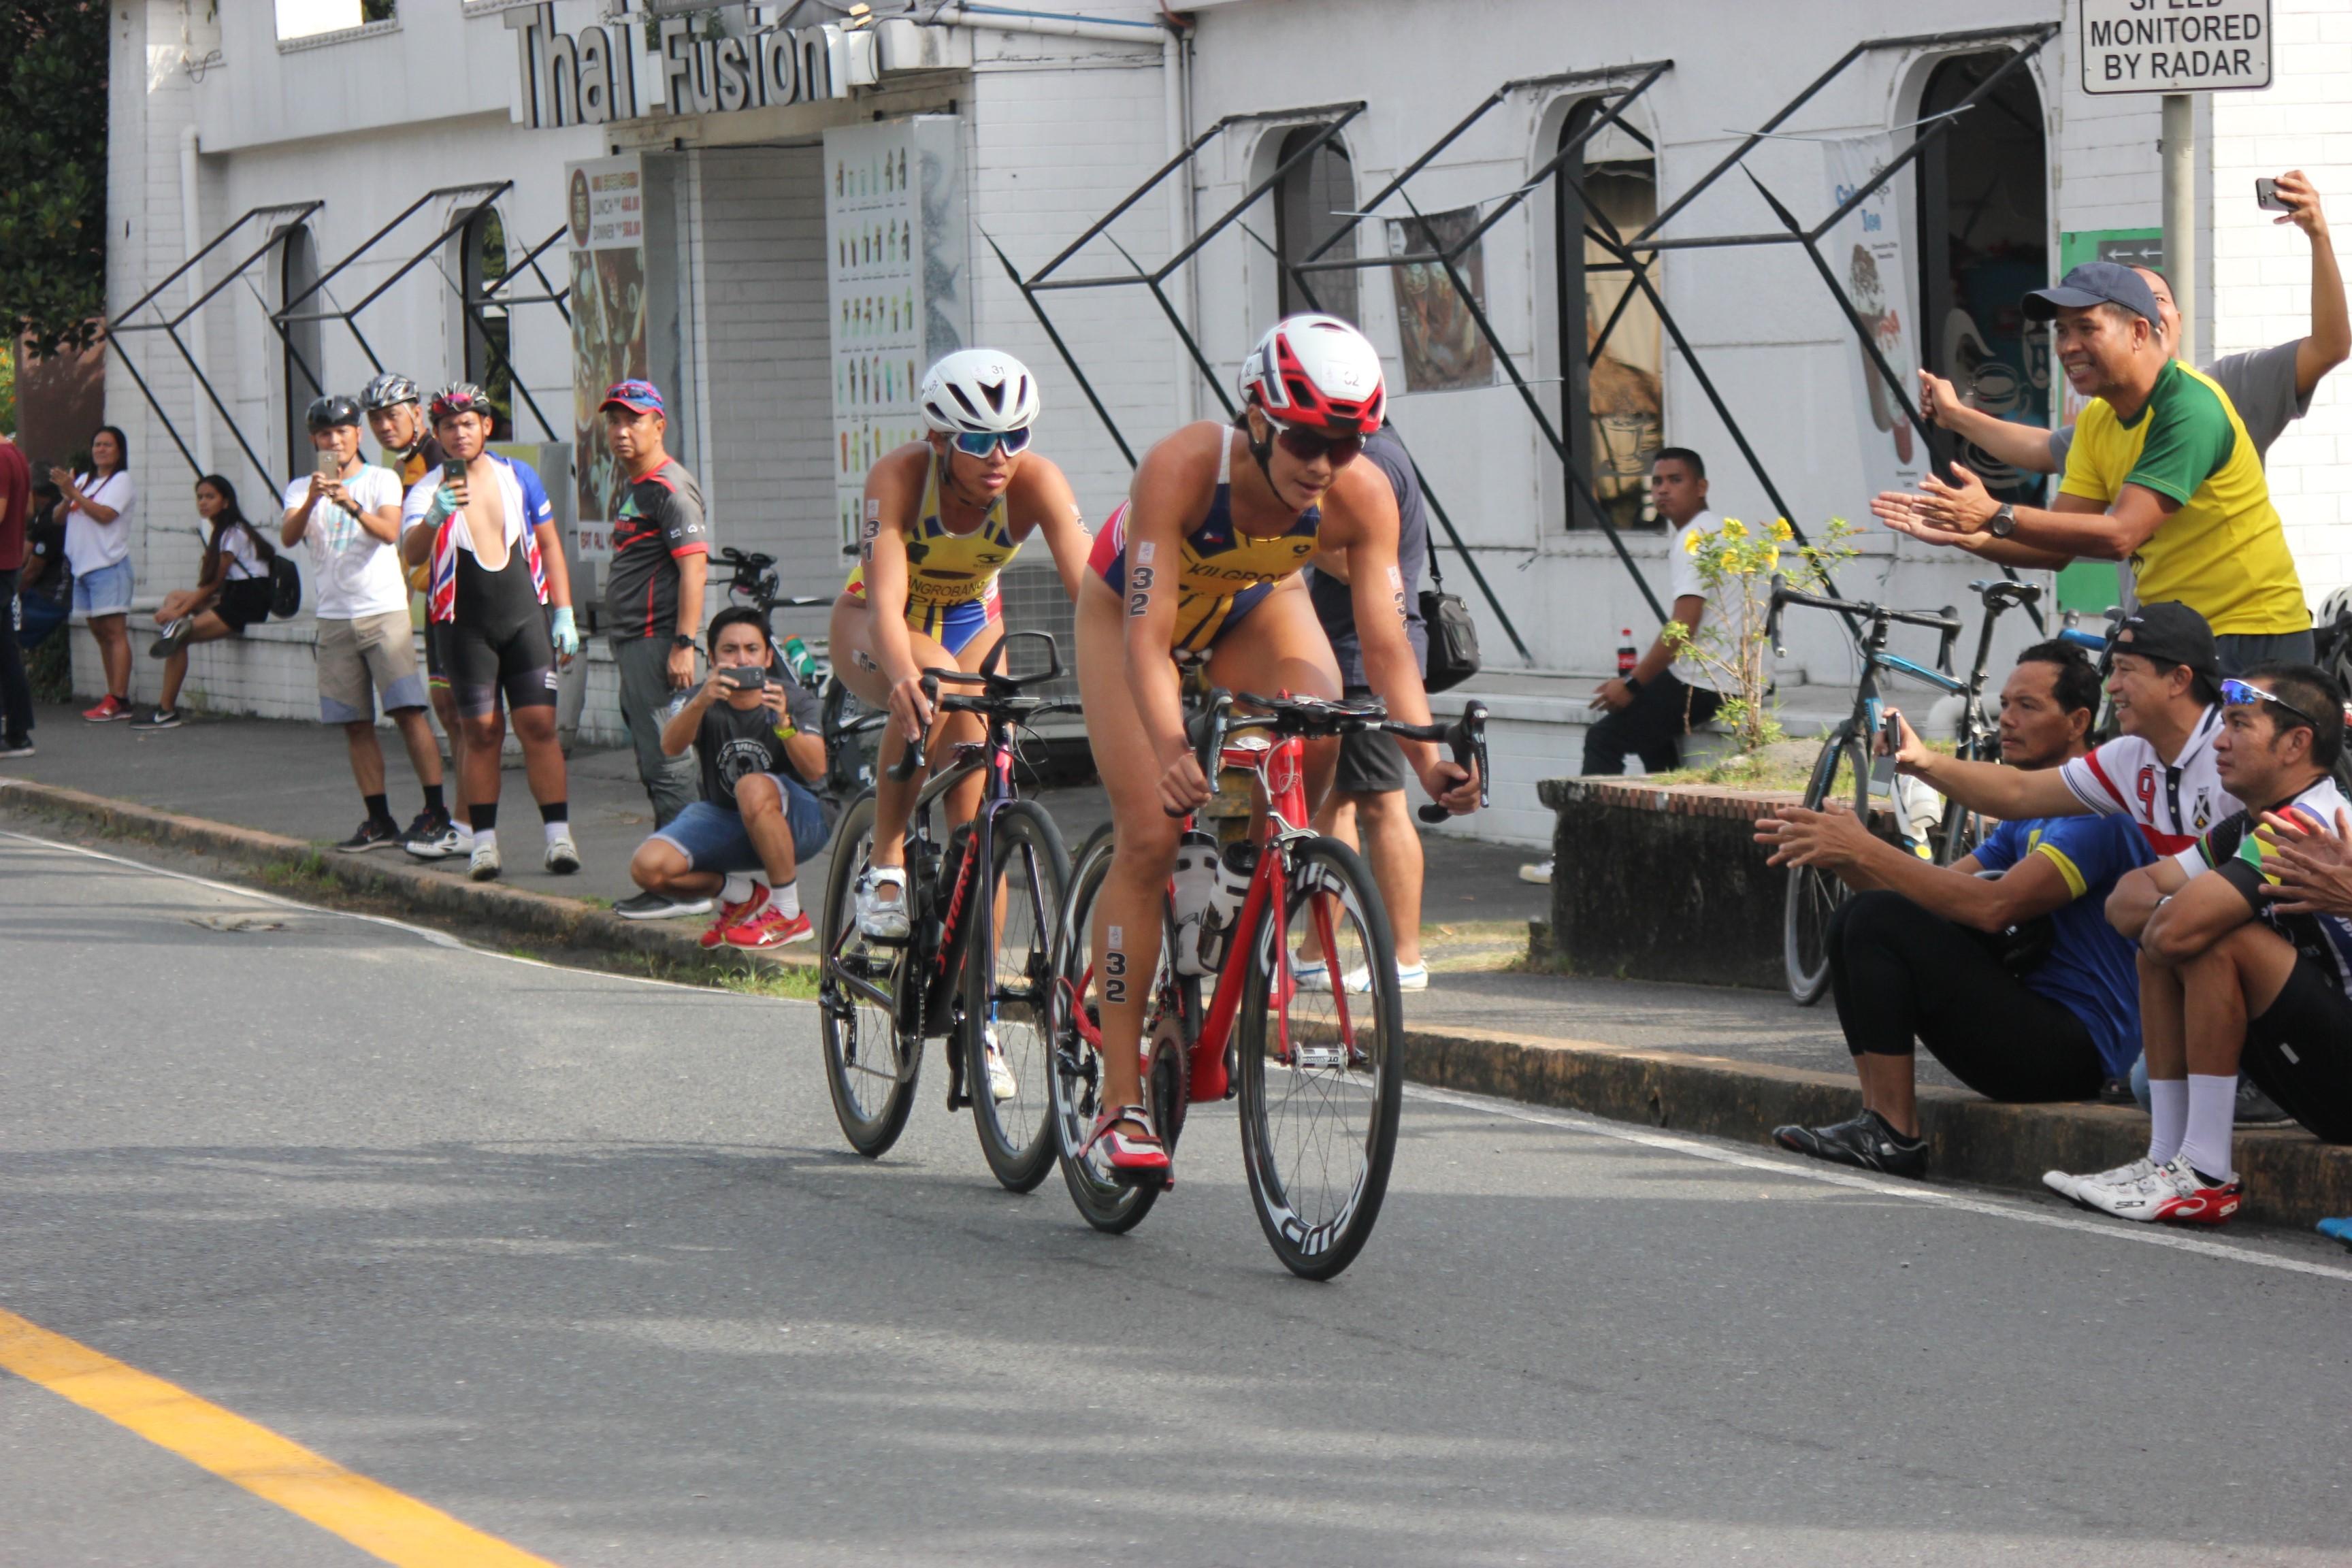 Kim Mangrobang (left) and Kim Kilgroe finished first and second, respectively, in the women's triathlon event.